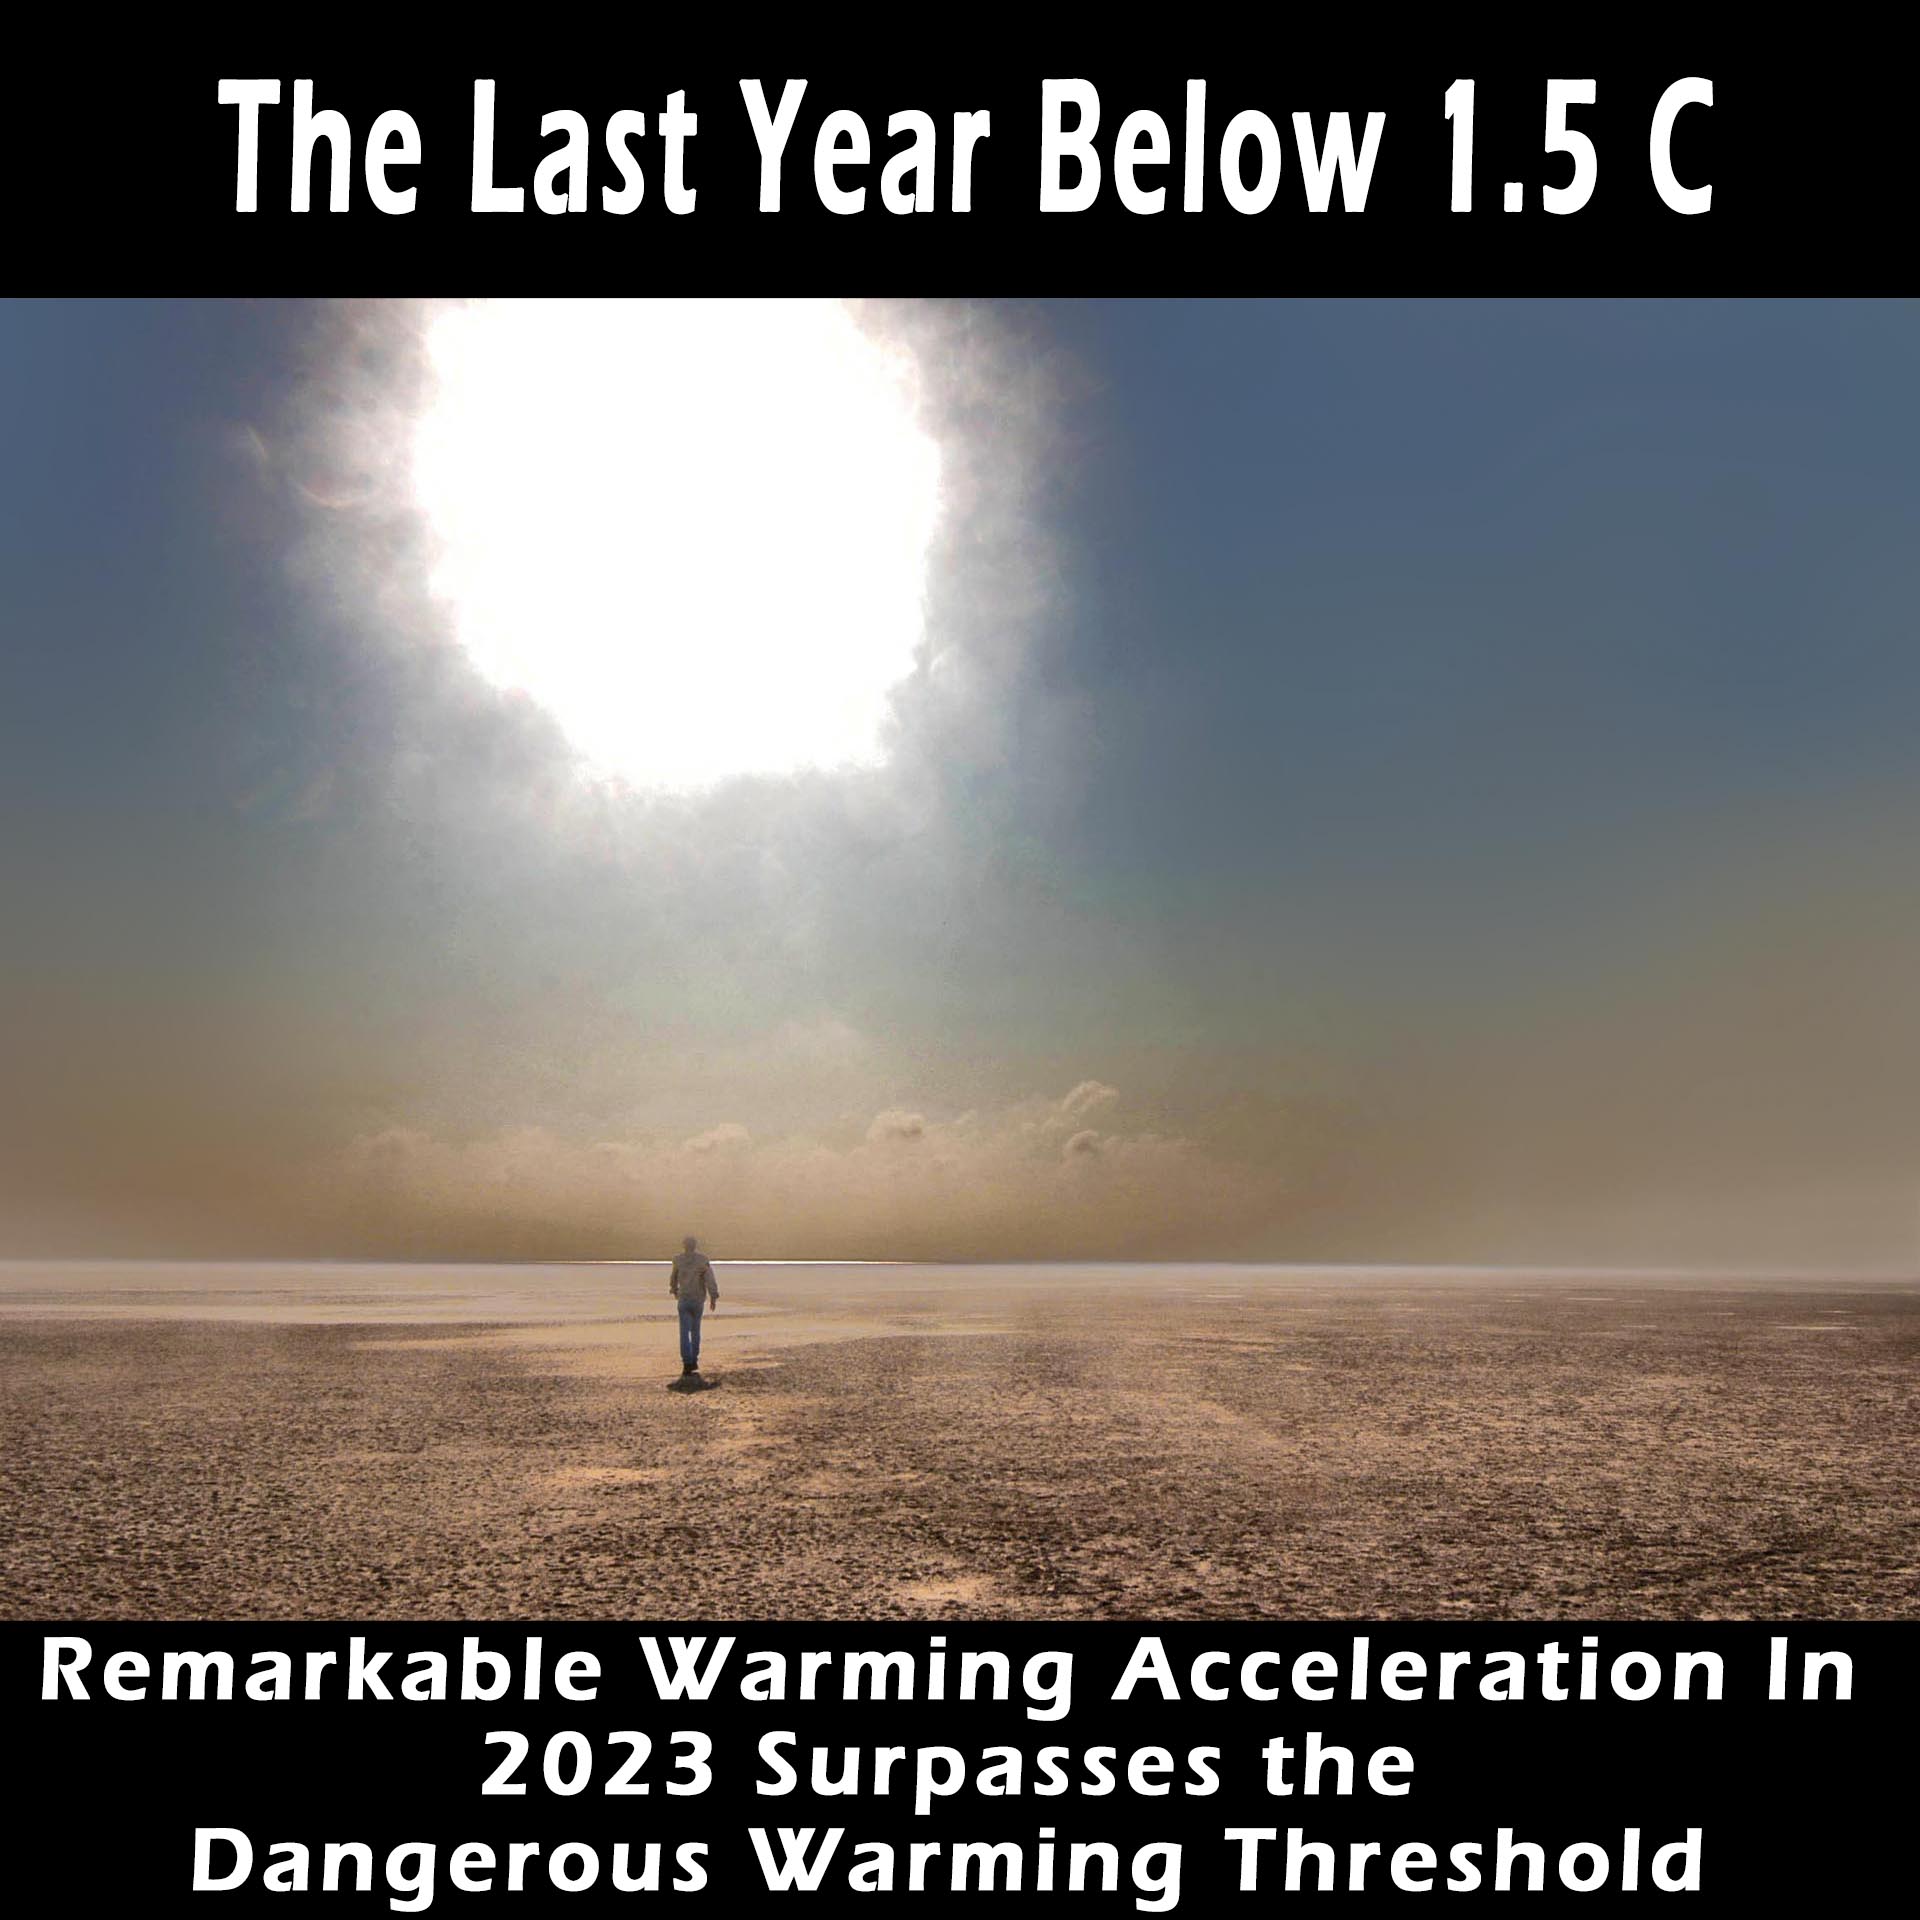 The Last Year Below 1.5 C – Remarkable Warming Acceleration In 2023 Surpasses the Dangerous Warming Threshold